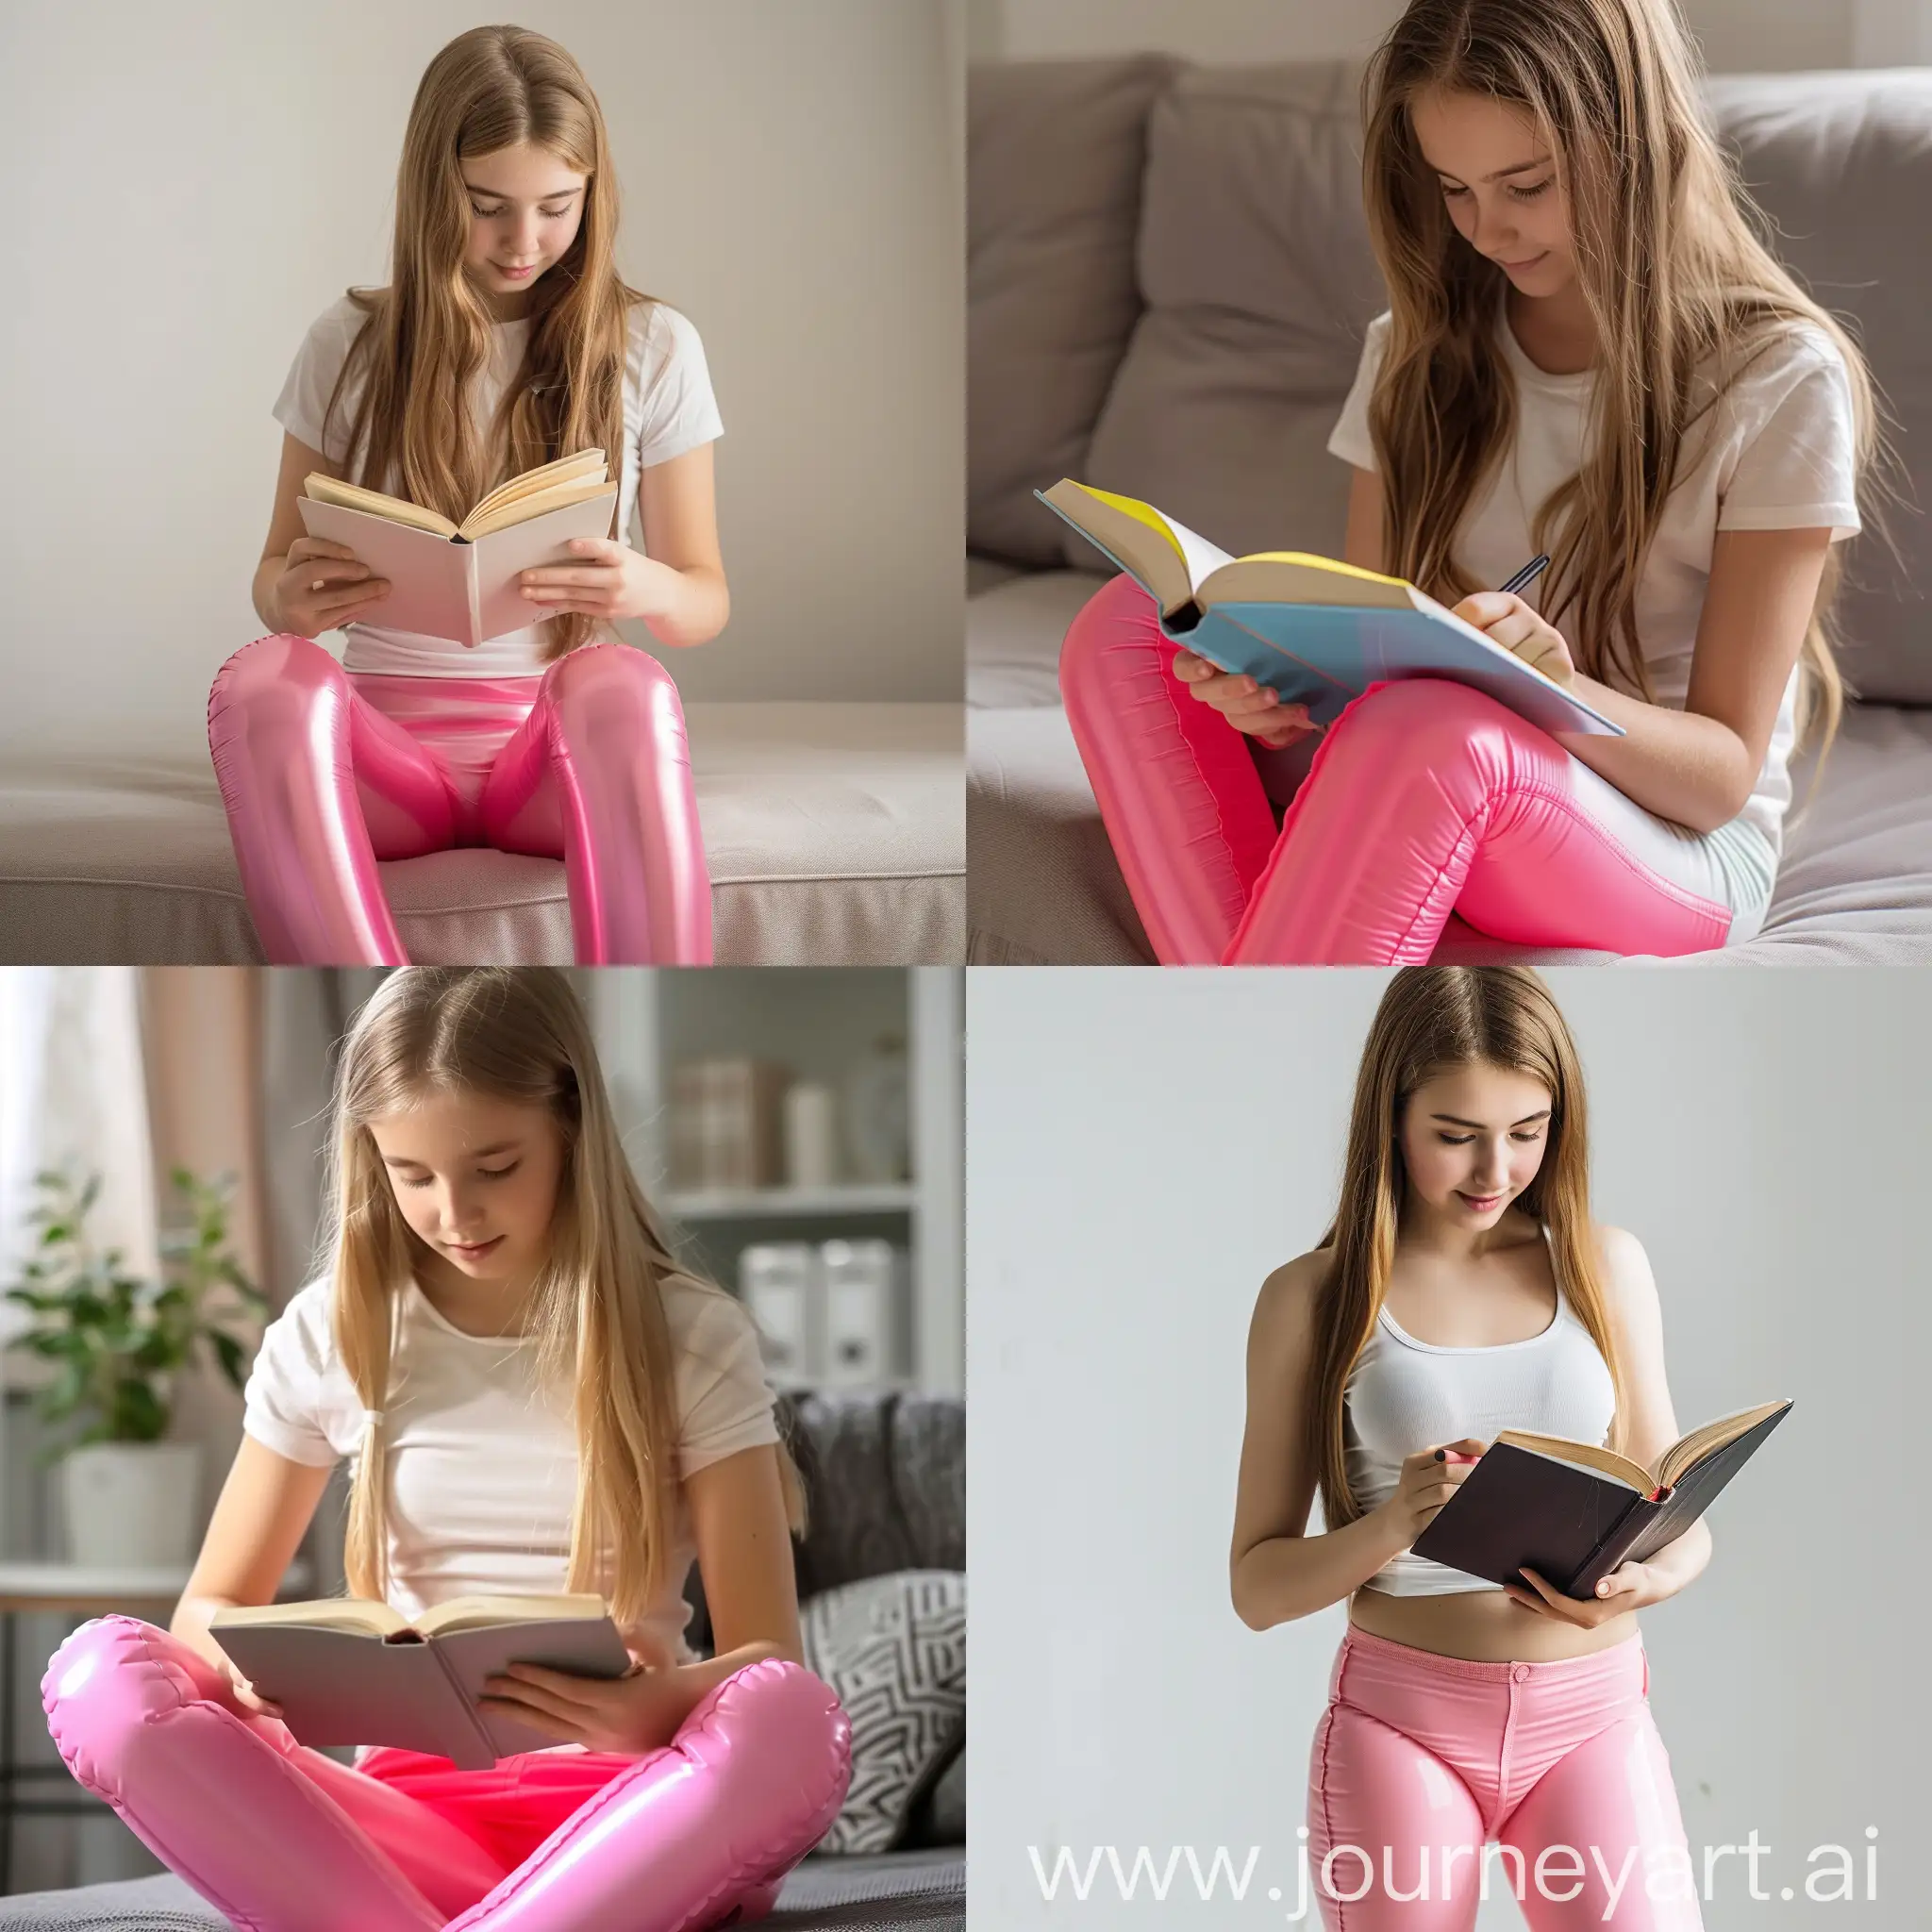 Teen-Girl-Reading-Book-in-Pink-Inflatable-Pants